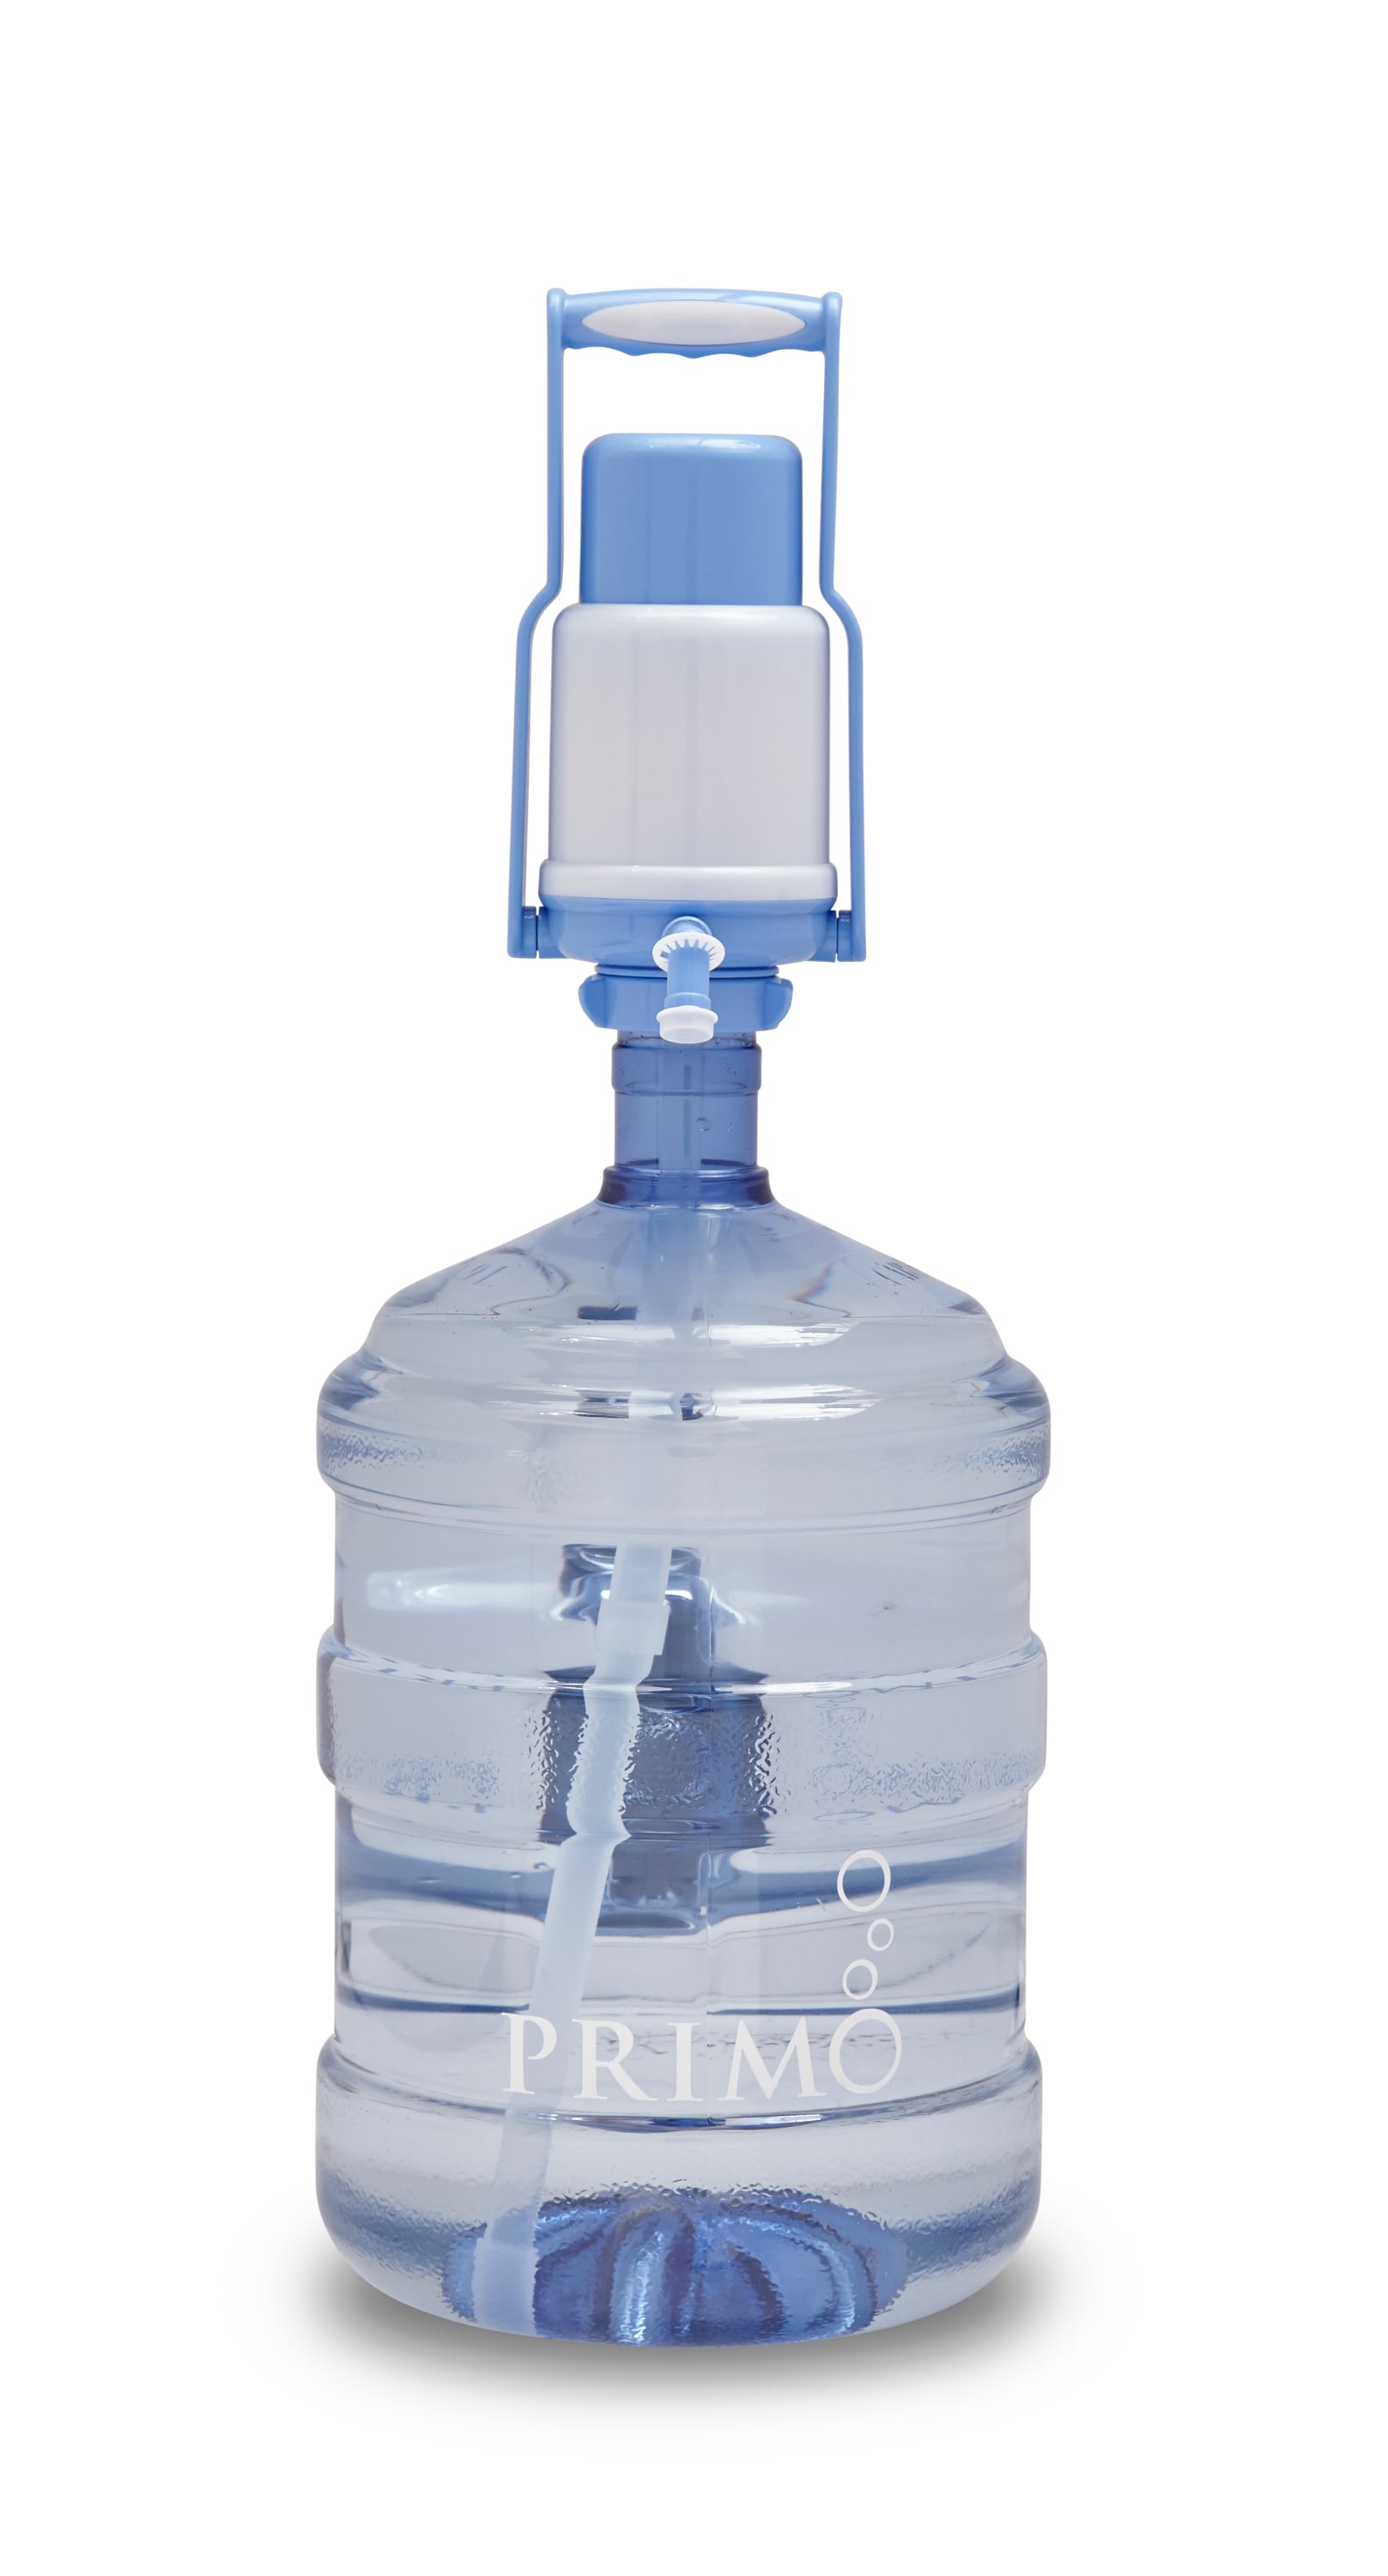 Primo White Water Bottle Pump - Dispenses Refreshing Room Temperature Water  - Simple Design - Base Warranty Included in the Water Coolers department at